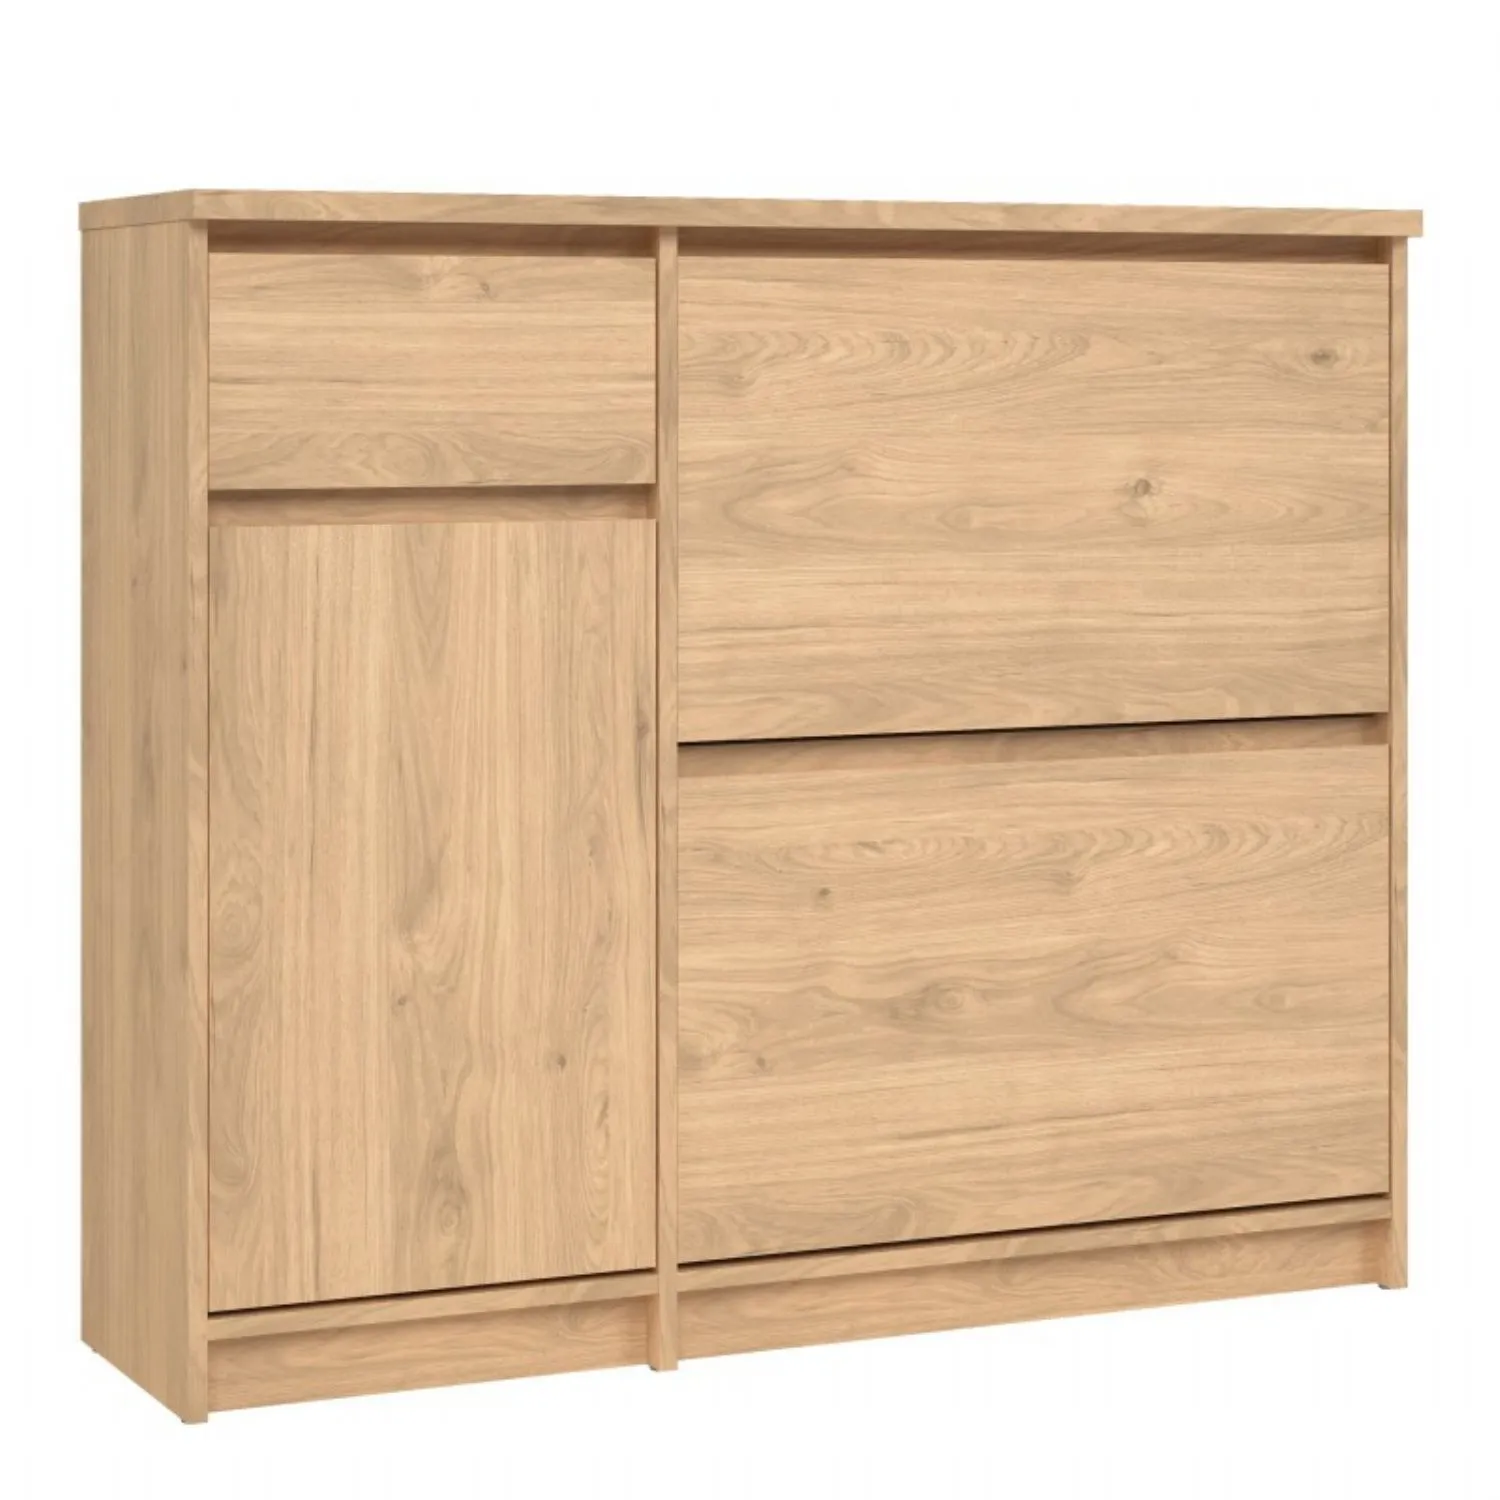 Shoe Cabinet with 2 Shoe Compartments, 1 Door and 1 Drawer in Jackson Hickory Oak